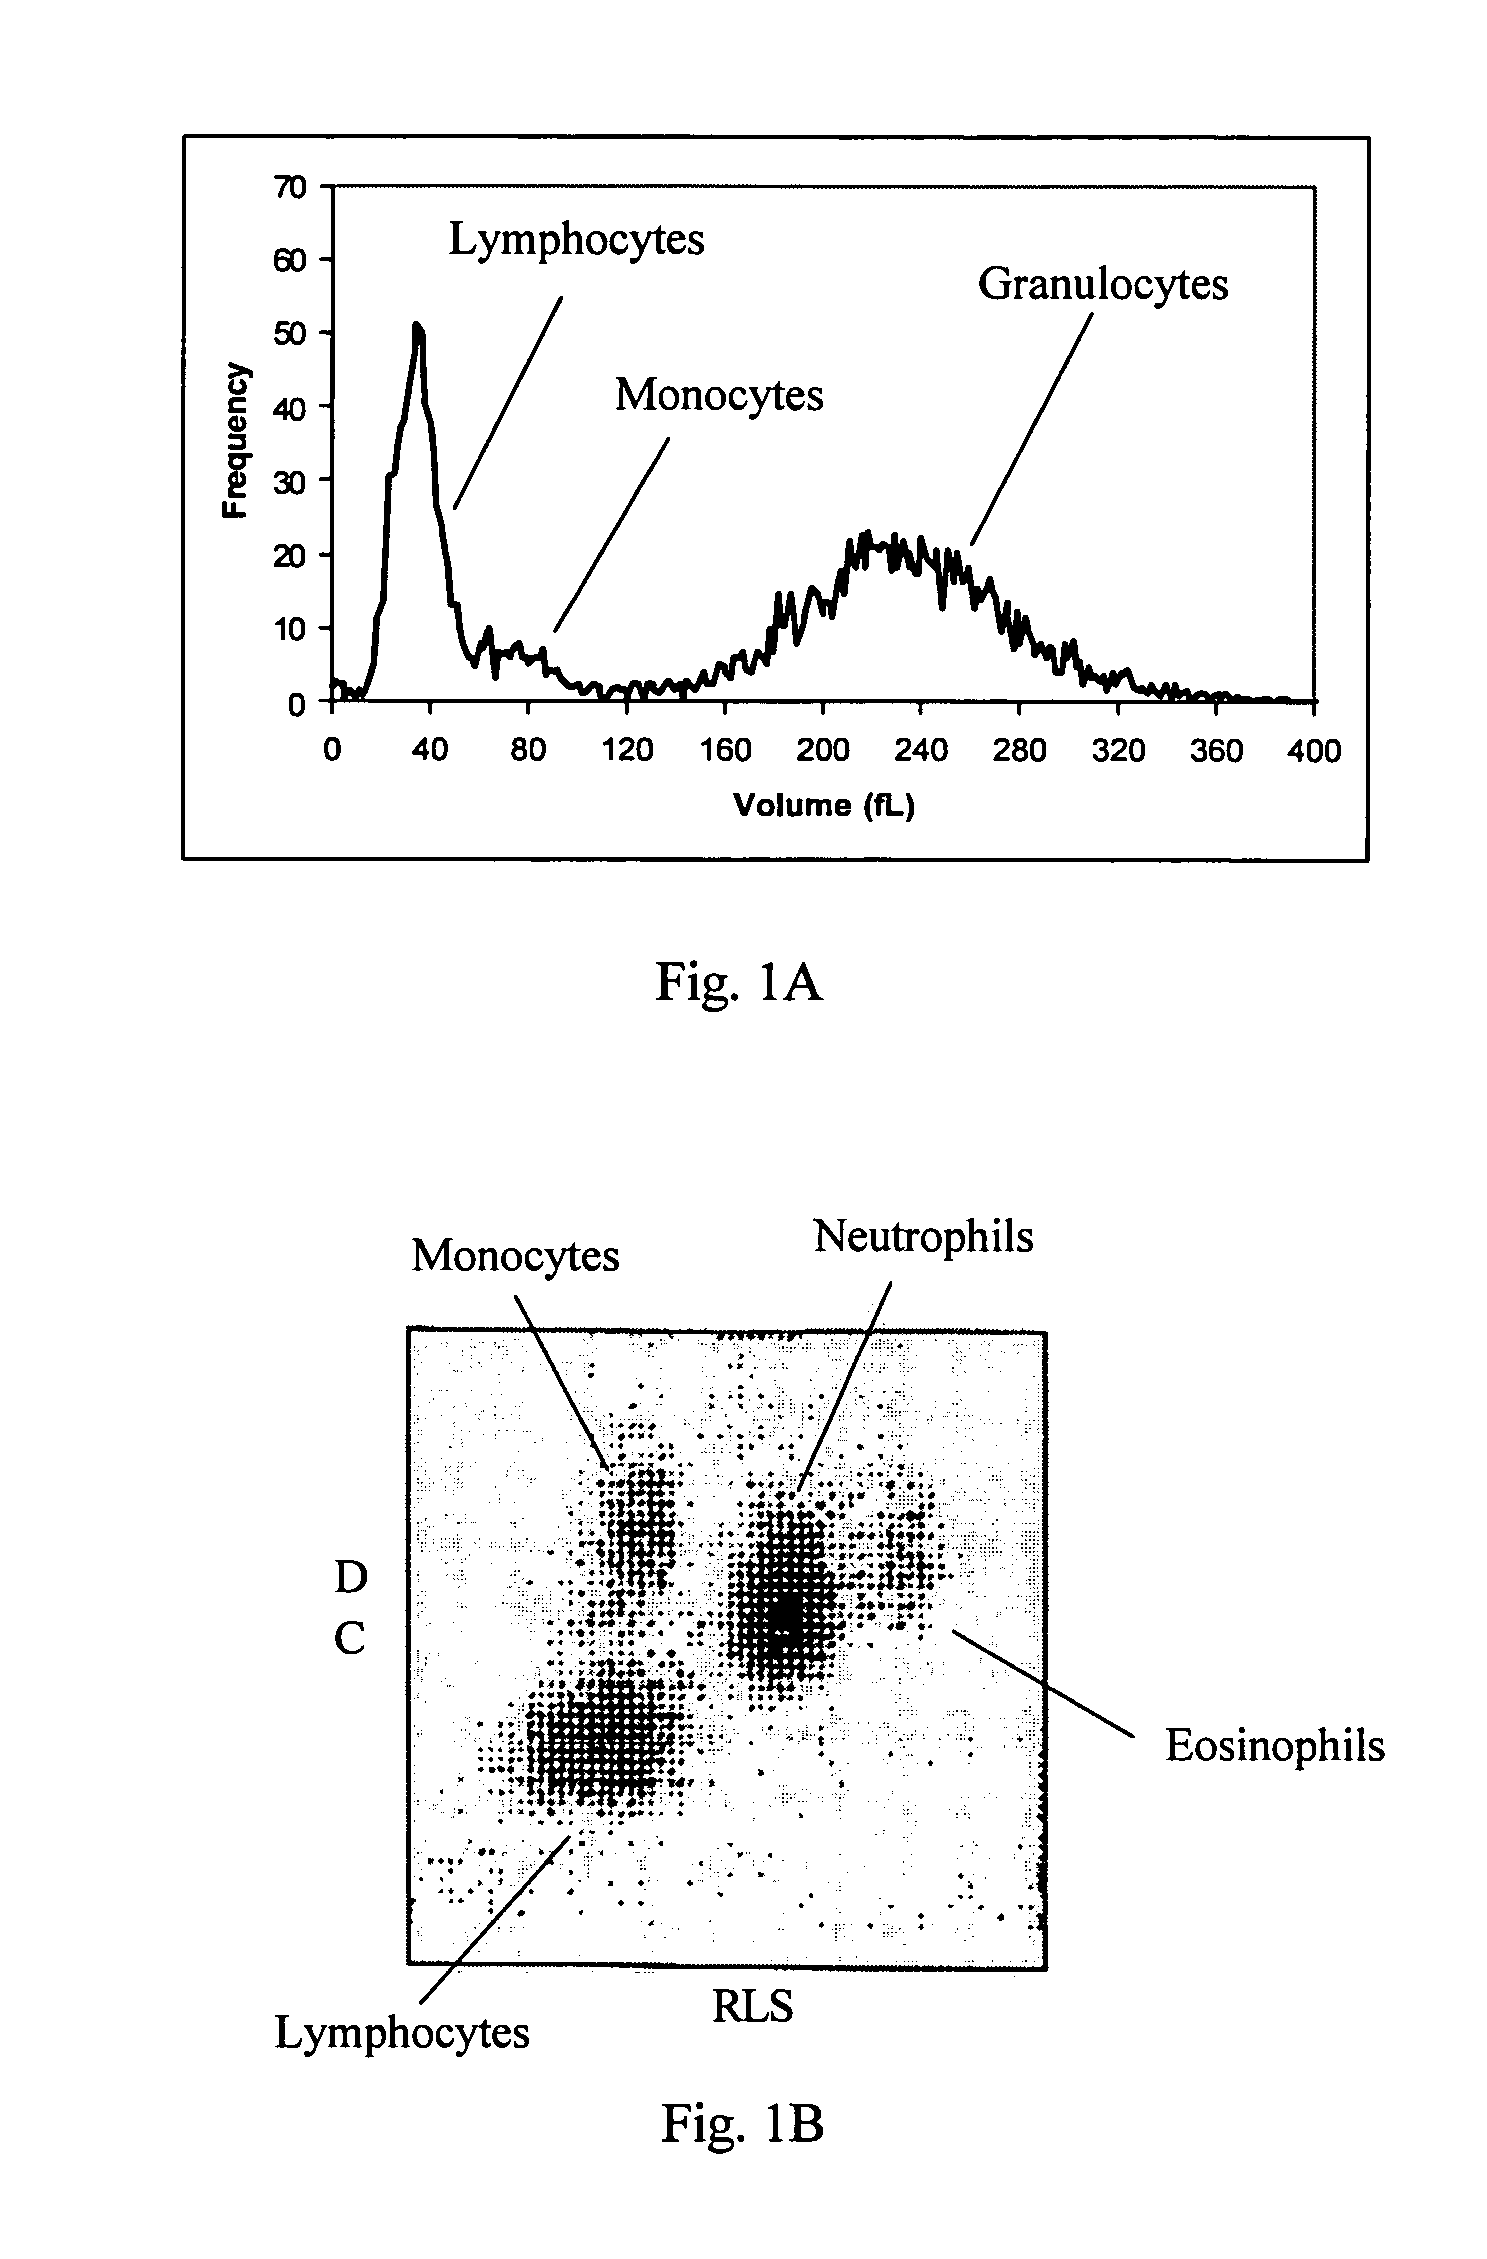 Reference control composition containing a nucleated red blood cell component made of non-nucleated blood cells